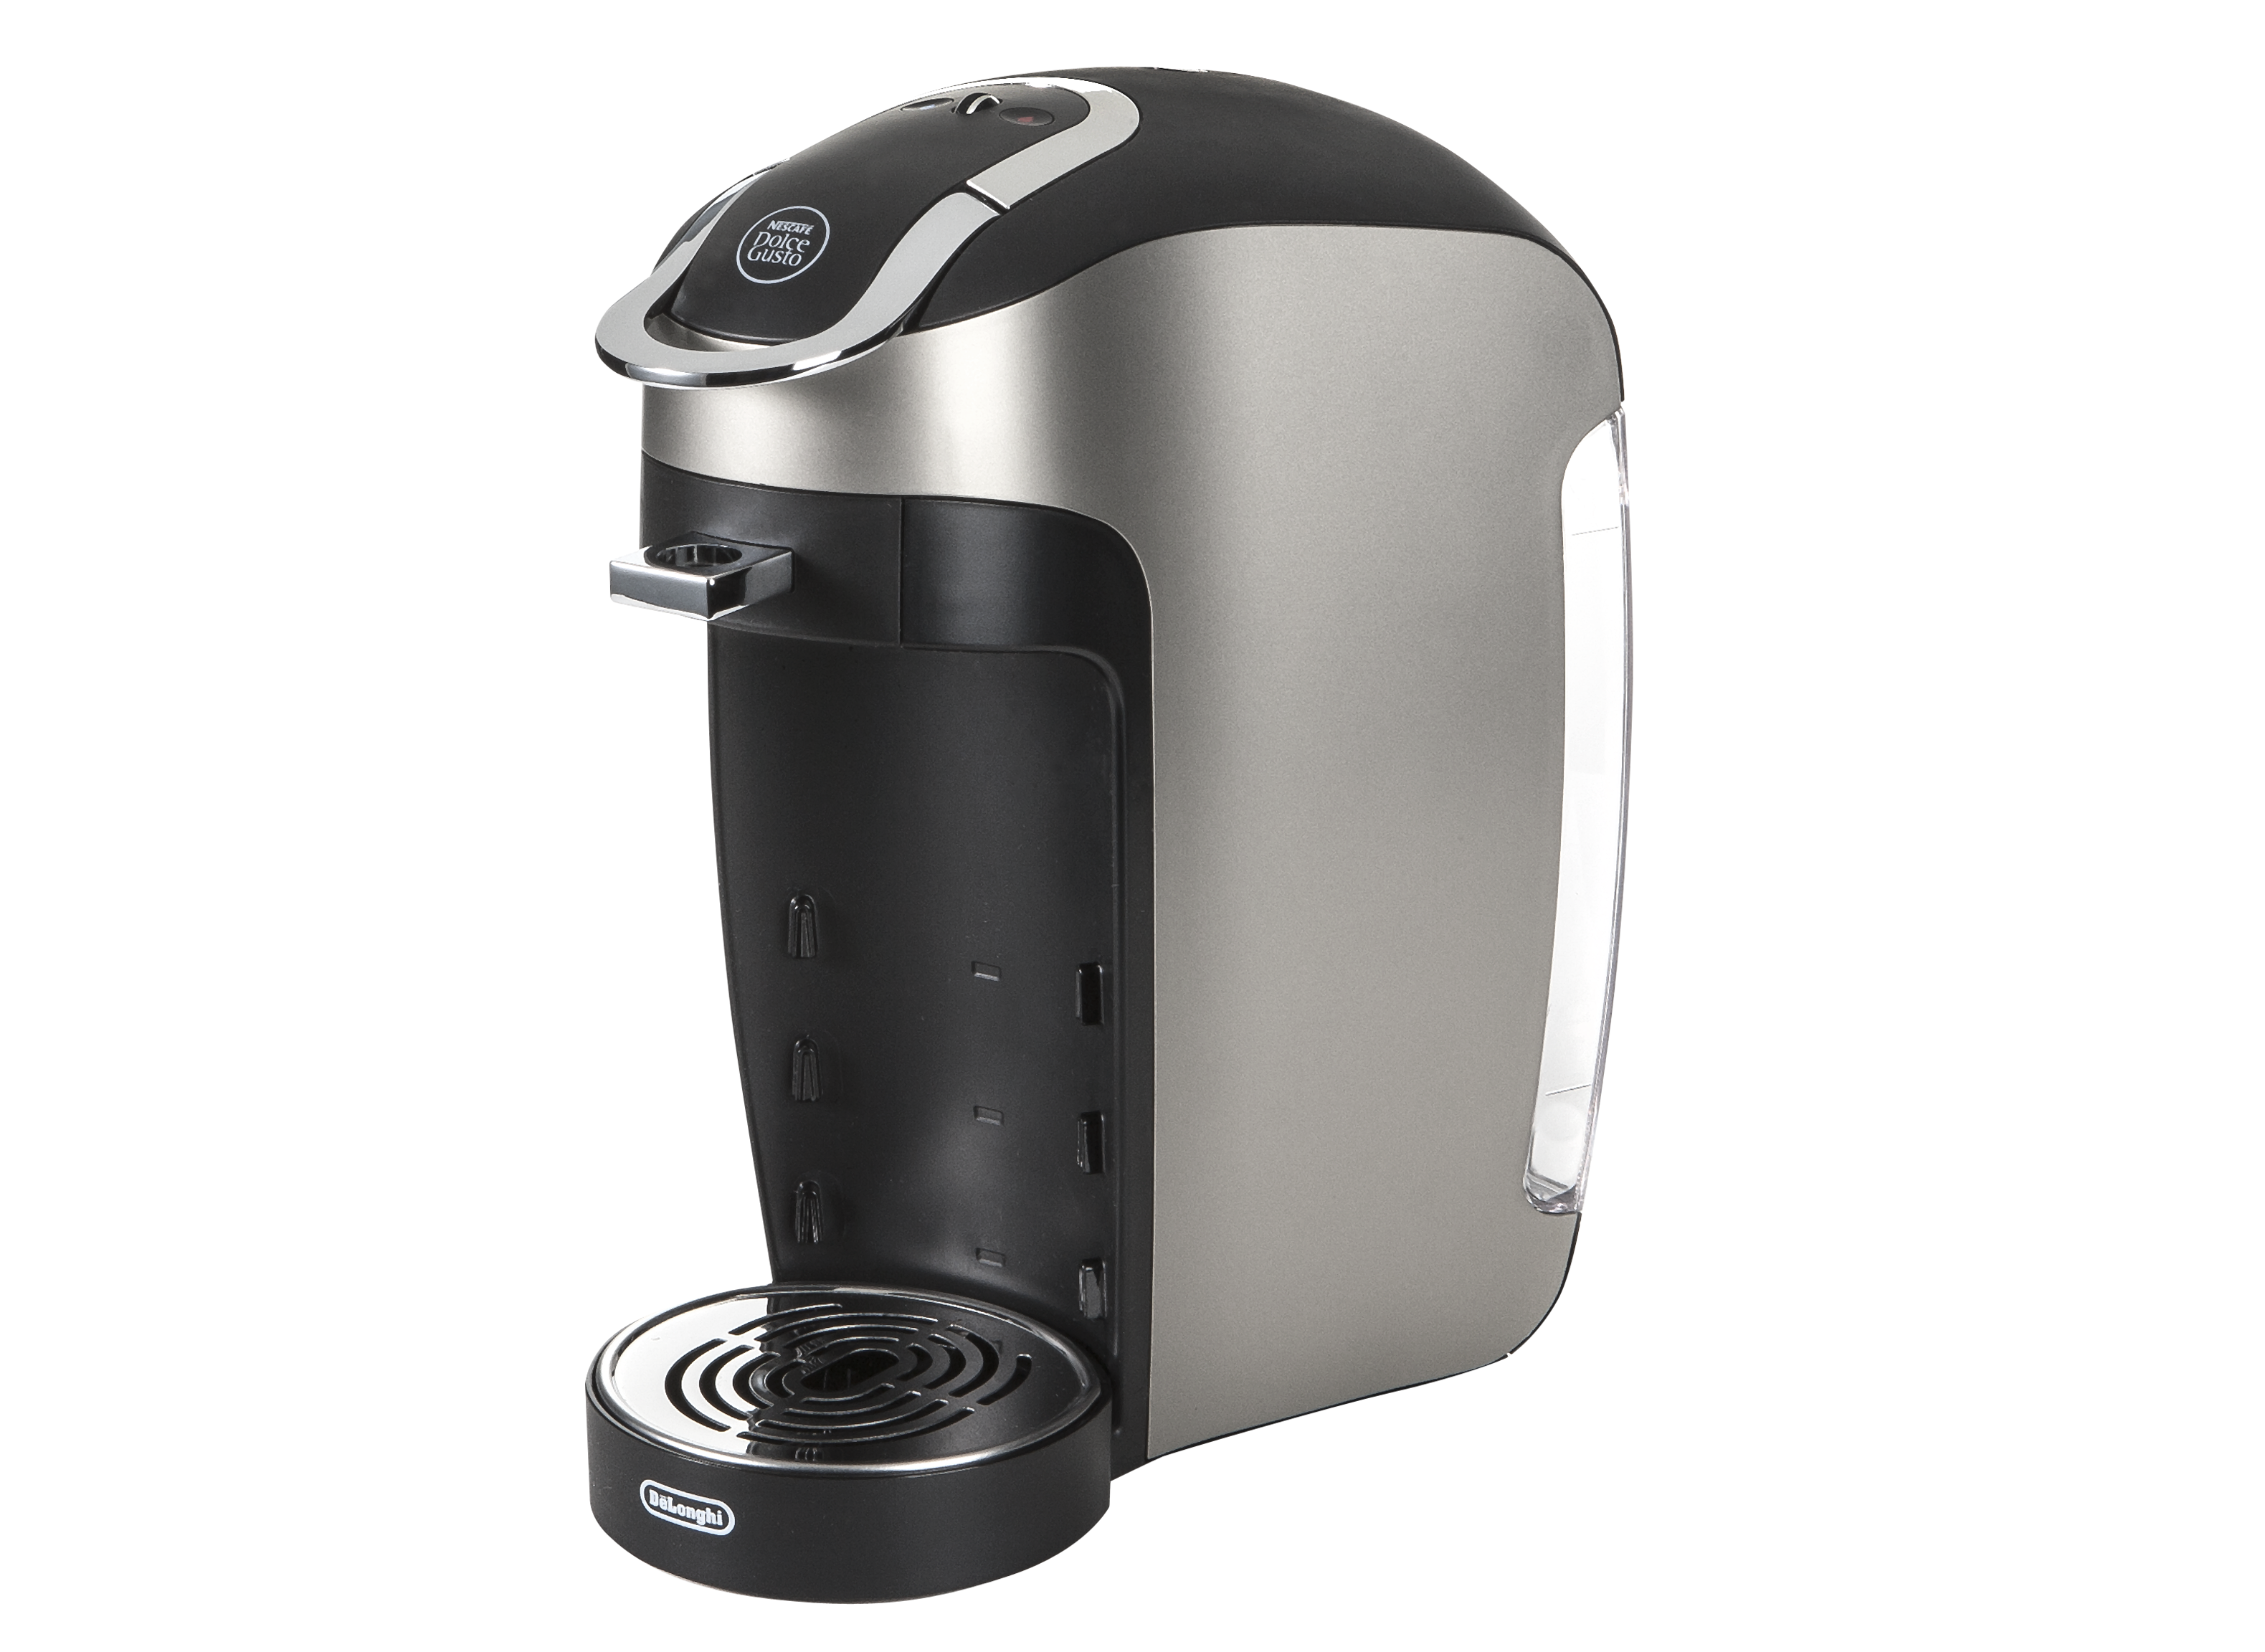 https://crdms.images.consumerreports.org/prod/products/cr/models/267978-podcoffeemakers-delonghi-nescafedolcegustoesperta.png